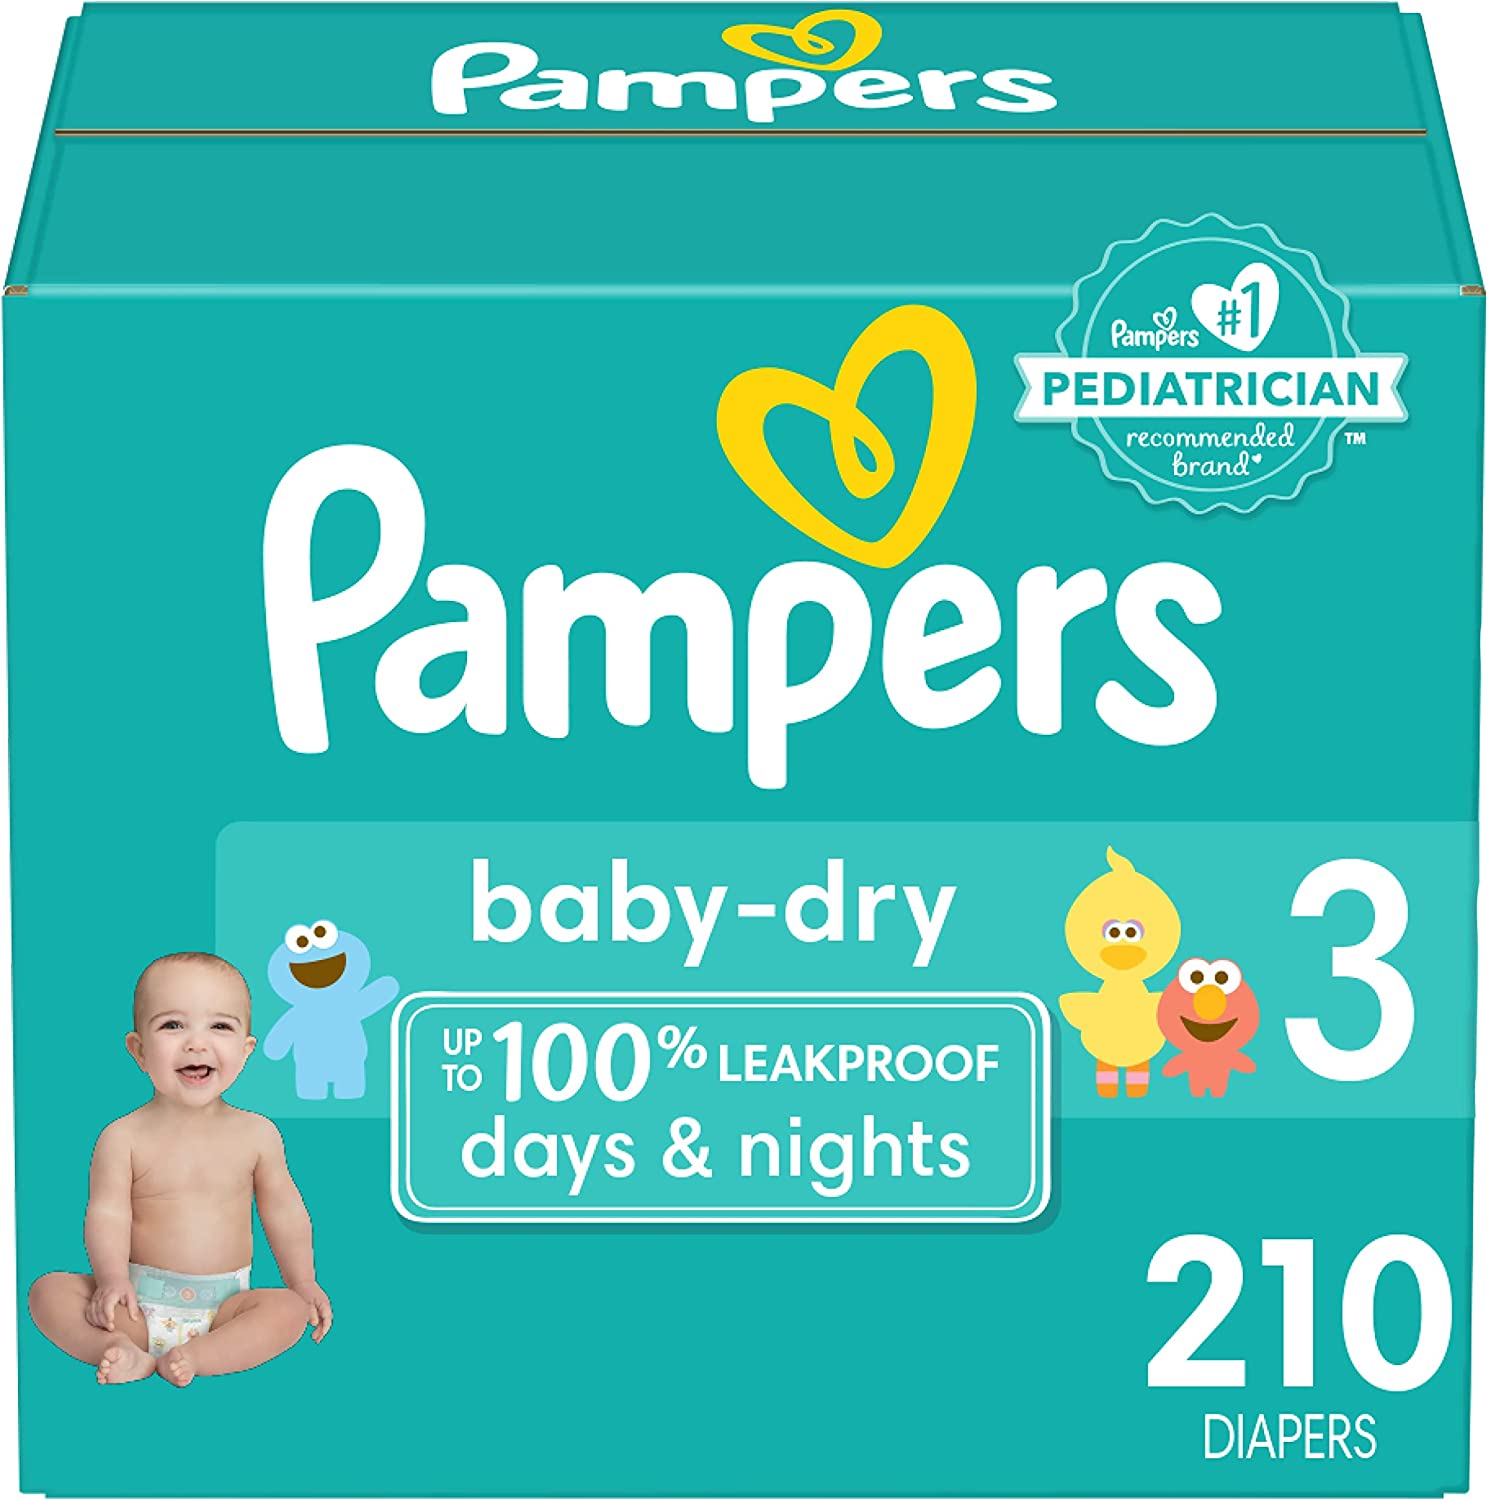 Diapers Size 3, 210 Count – Pampers Baby Dry Disposable Baby Diapers (Packaging & Prints May Vary)